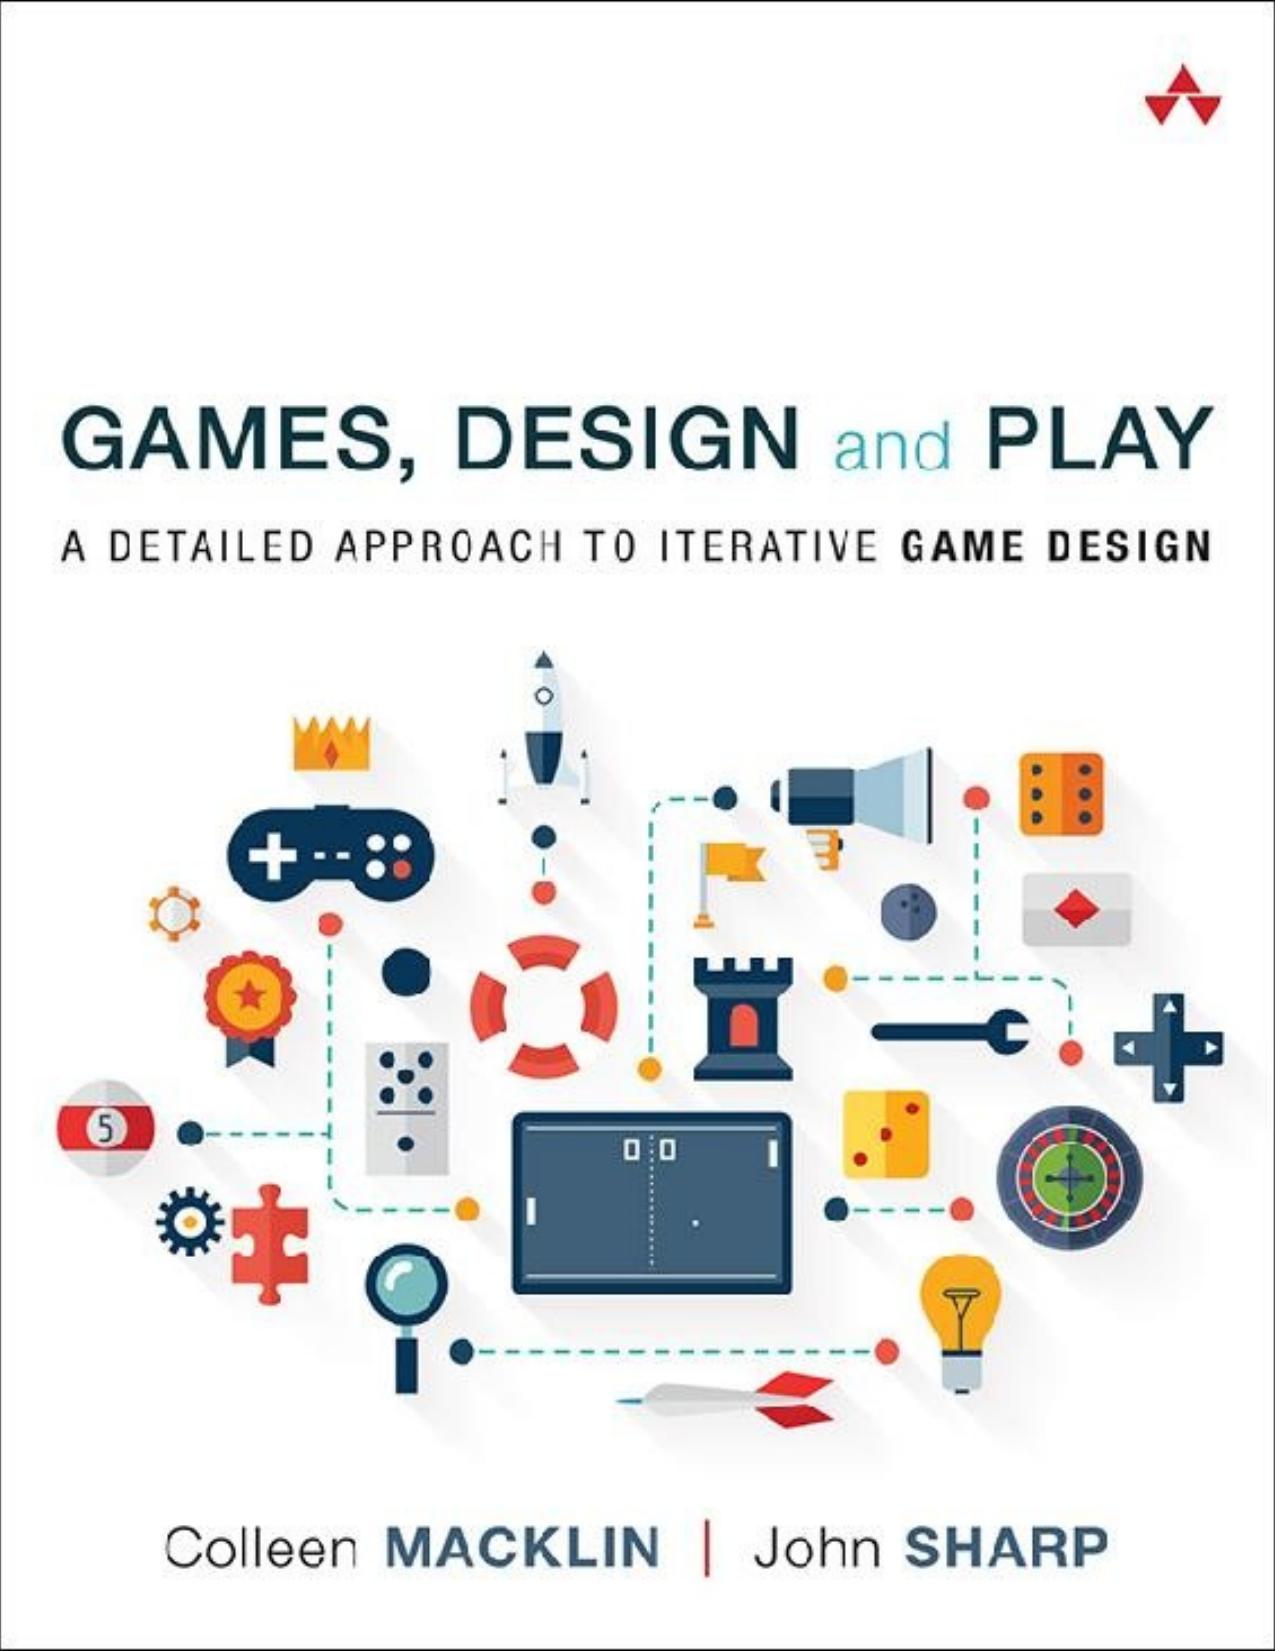 Games, Design and Play: A Detailed Approach to Iterative Game Design - PDFDrive.com